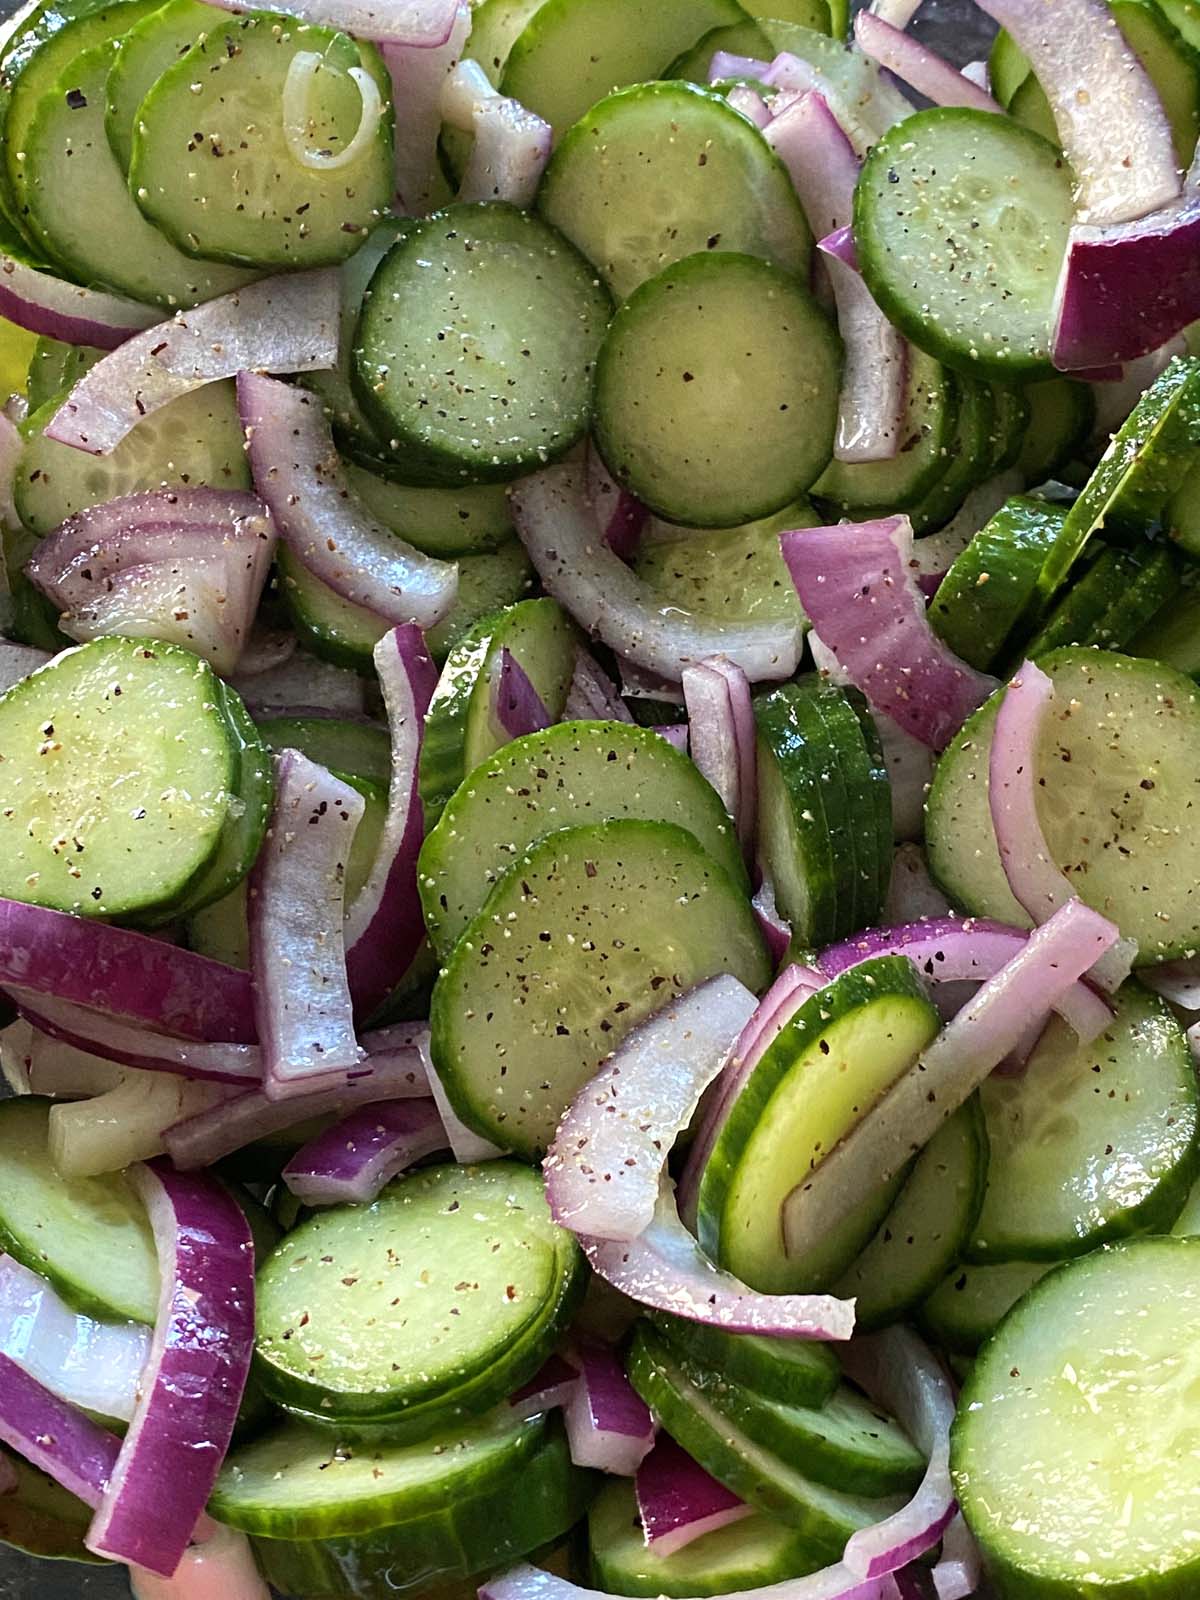 Cucumber and red onion salad.